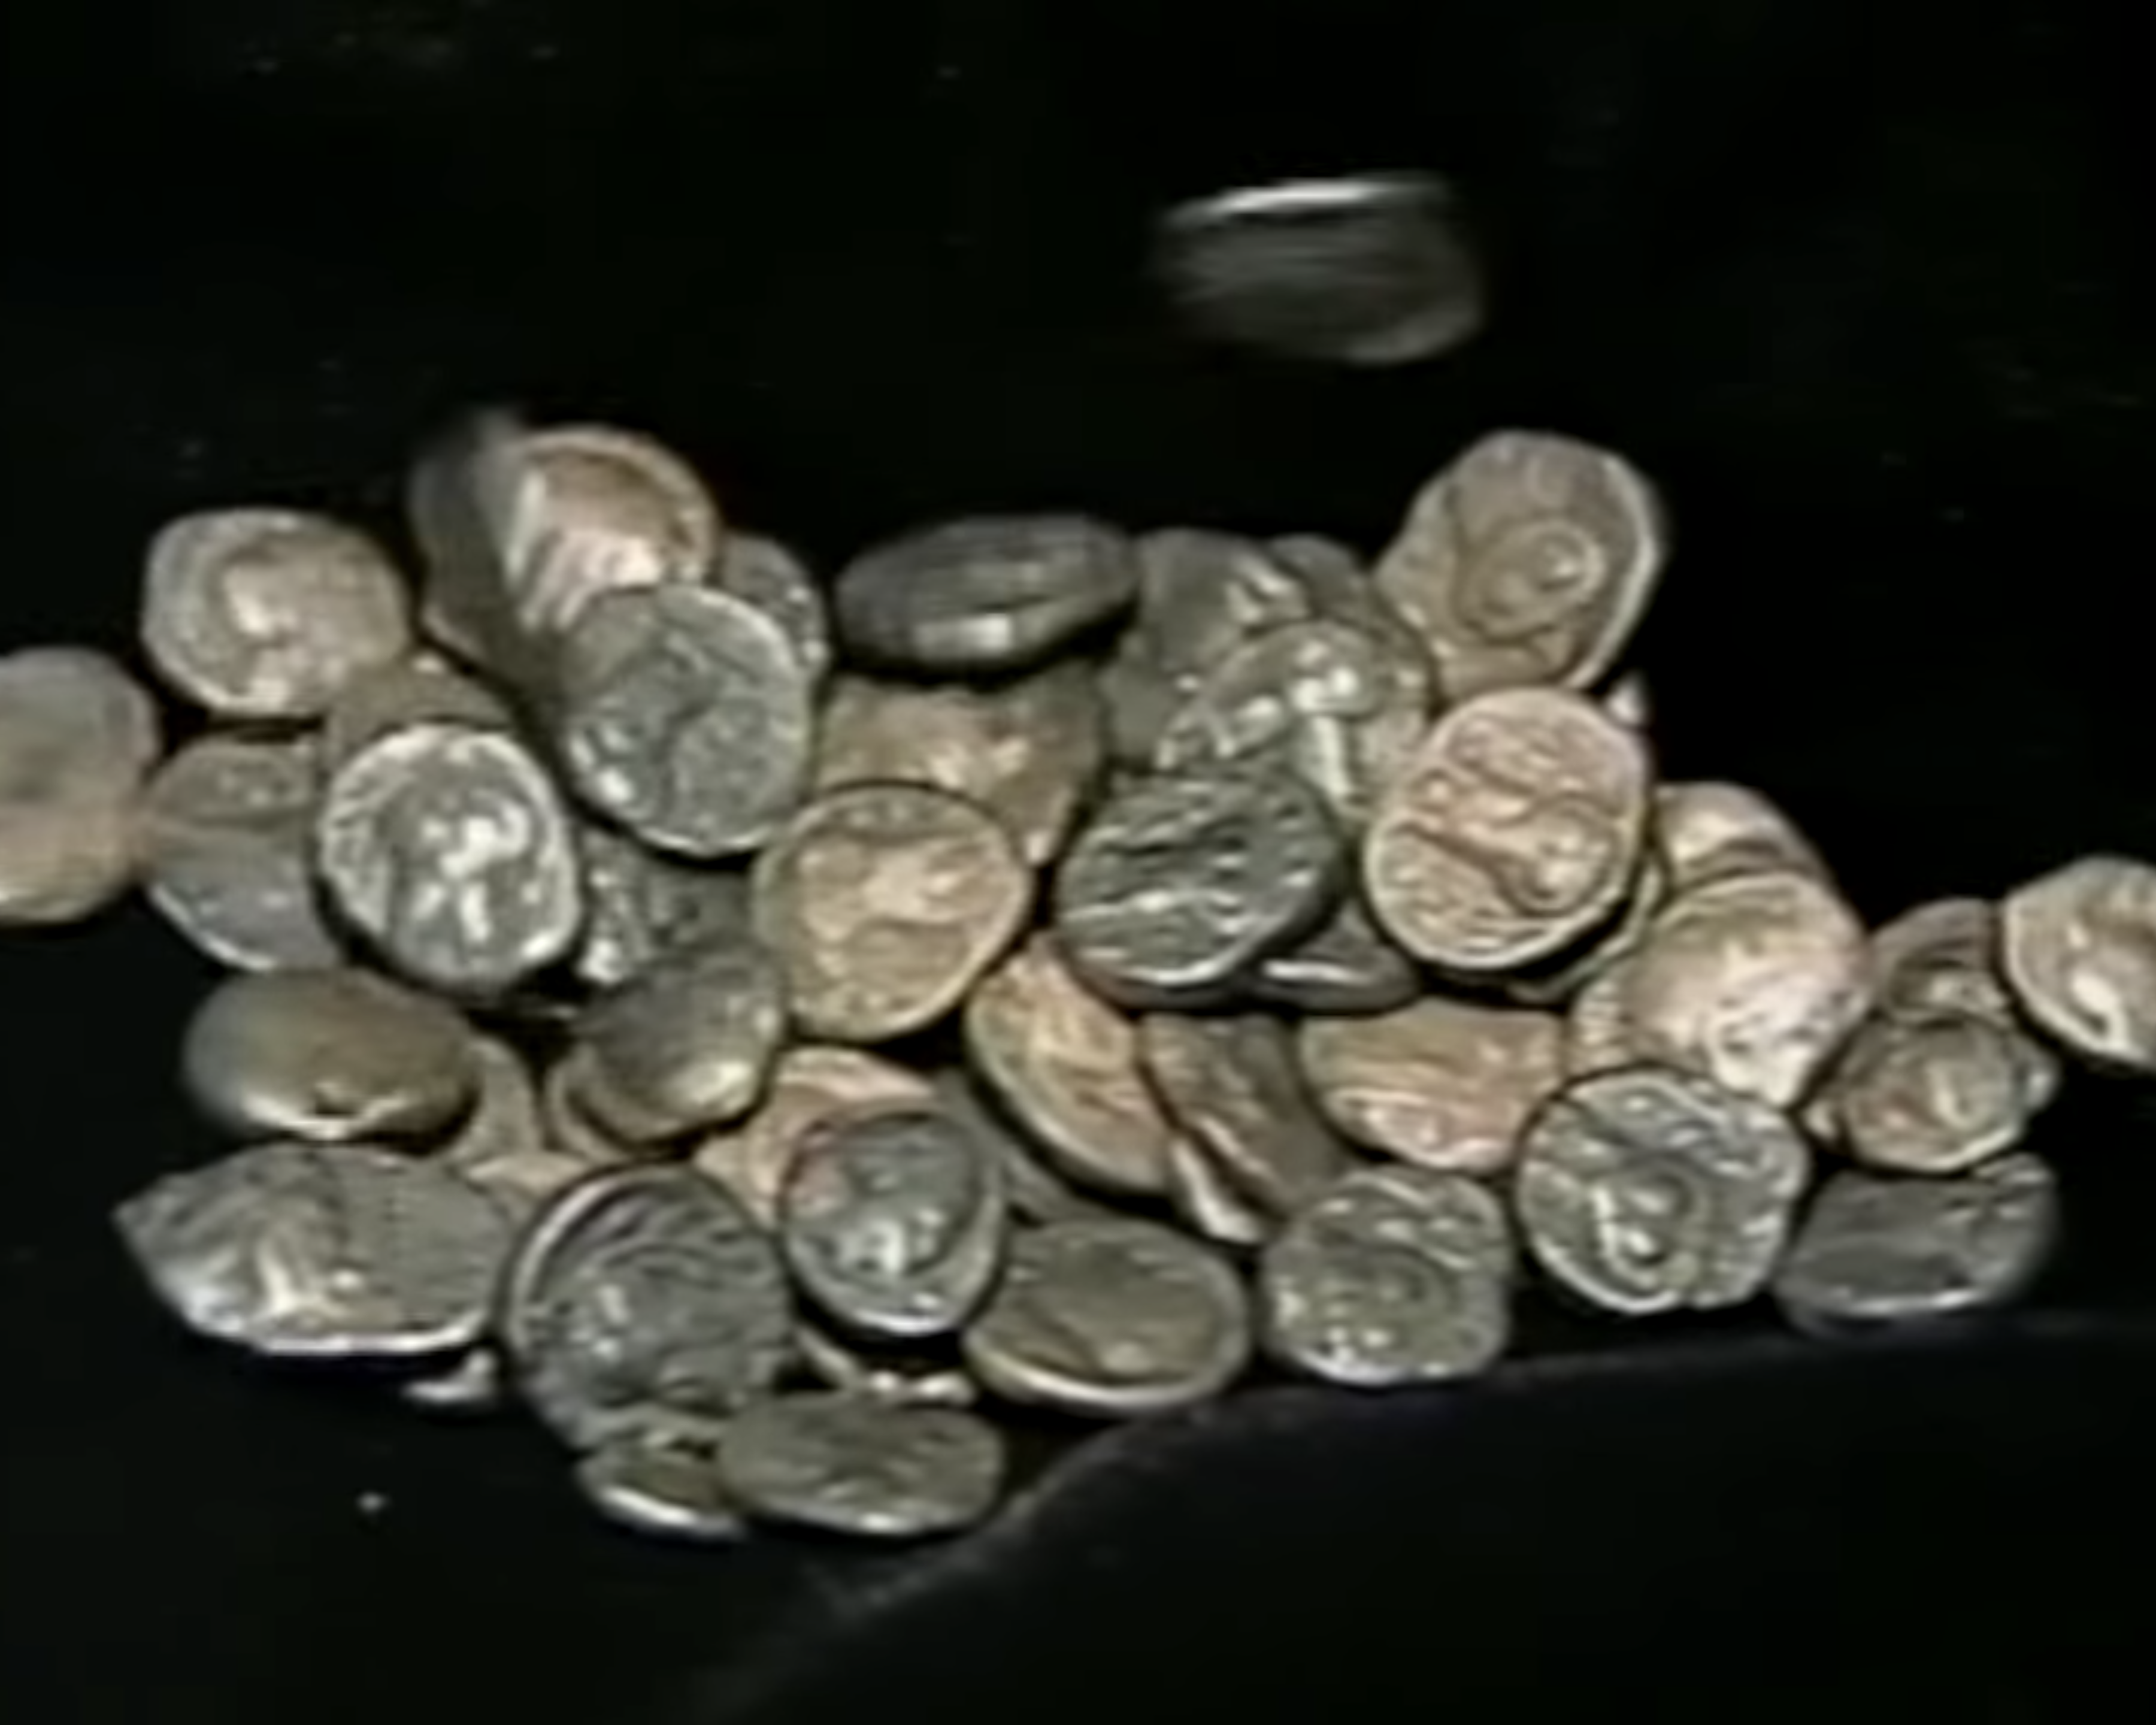 Drachmas, Doubloons, and Dollars: The History of Money